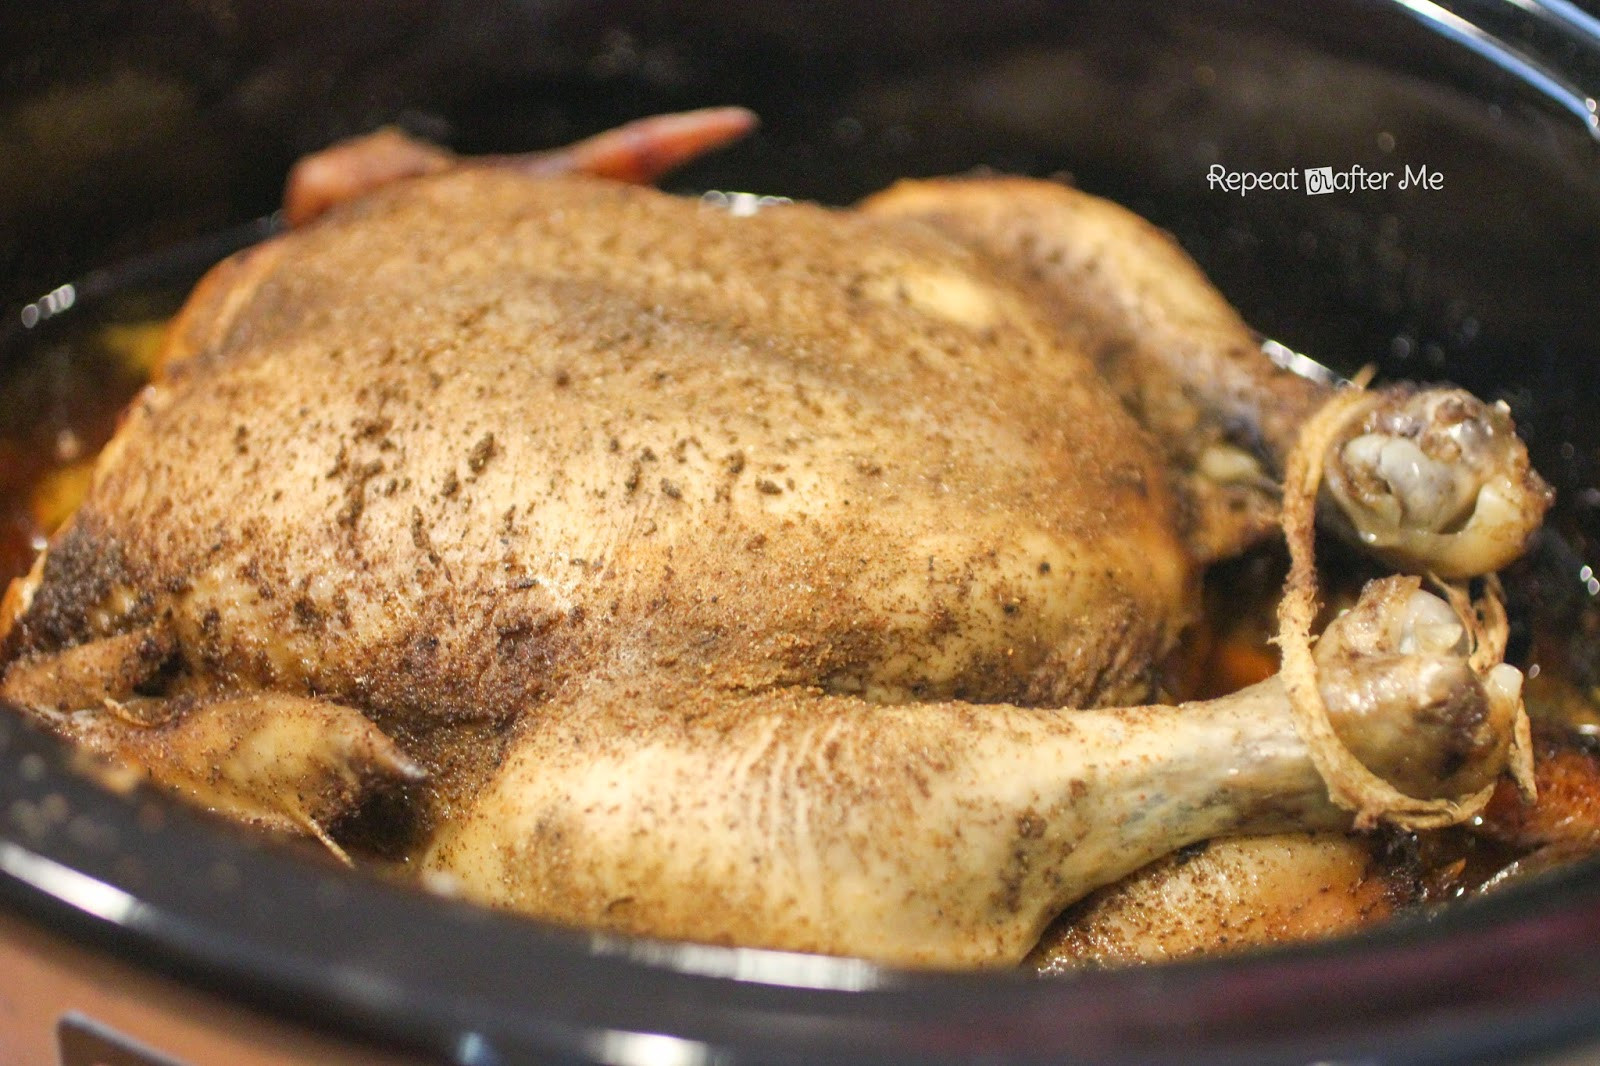 Cooking Whole Chicken In Crock Pot
 Repeat Crafter Me How to Cook a Whole Chicken in the